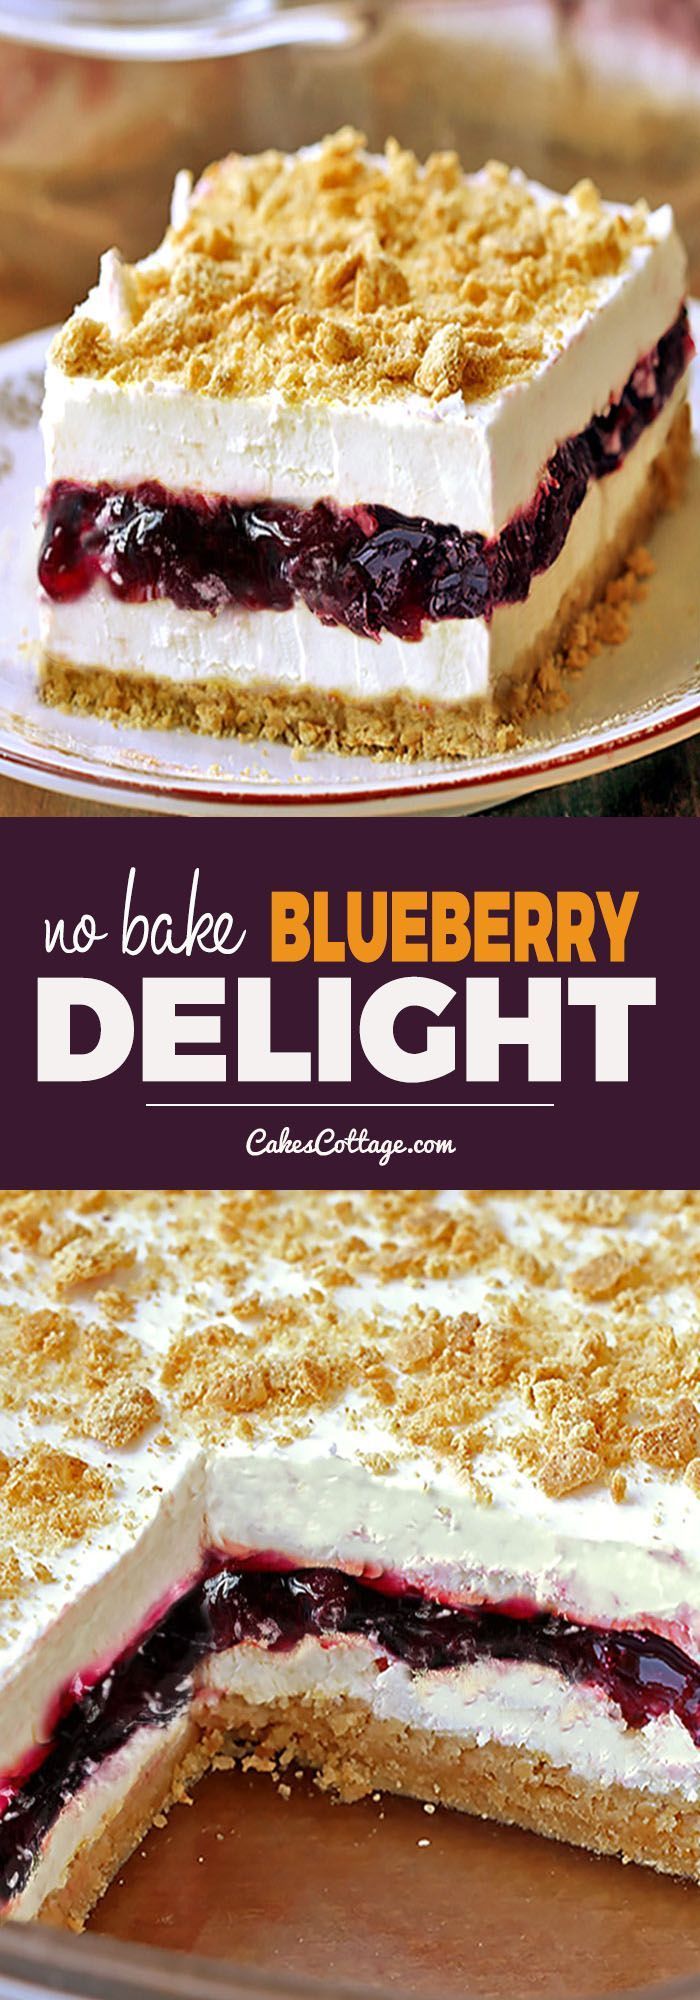 No Bake Blueberry Delight - Cakescottage -   19 quick thanksgiving desserts easy recipes ideas